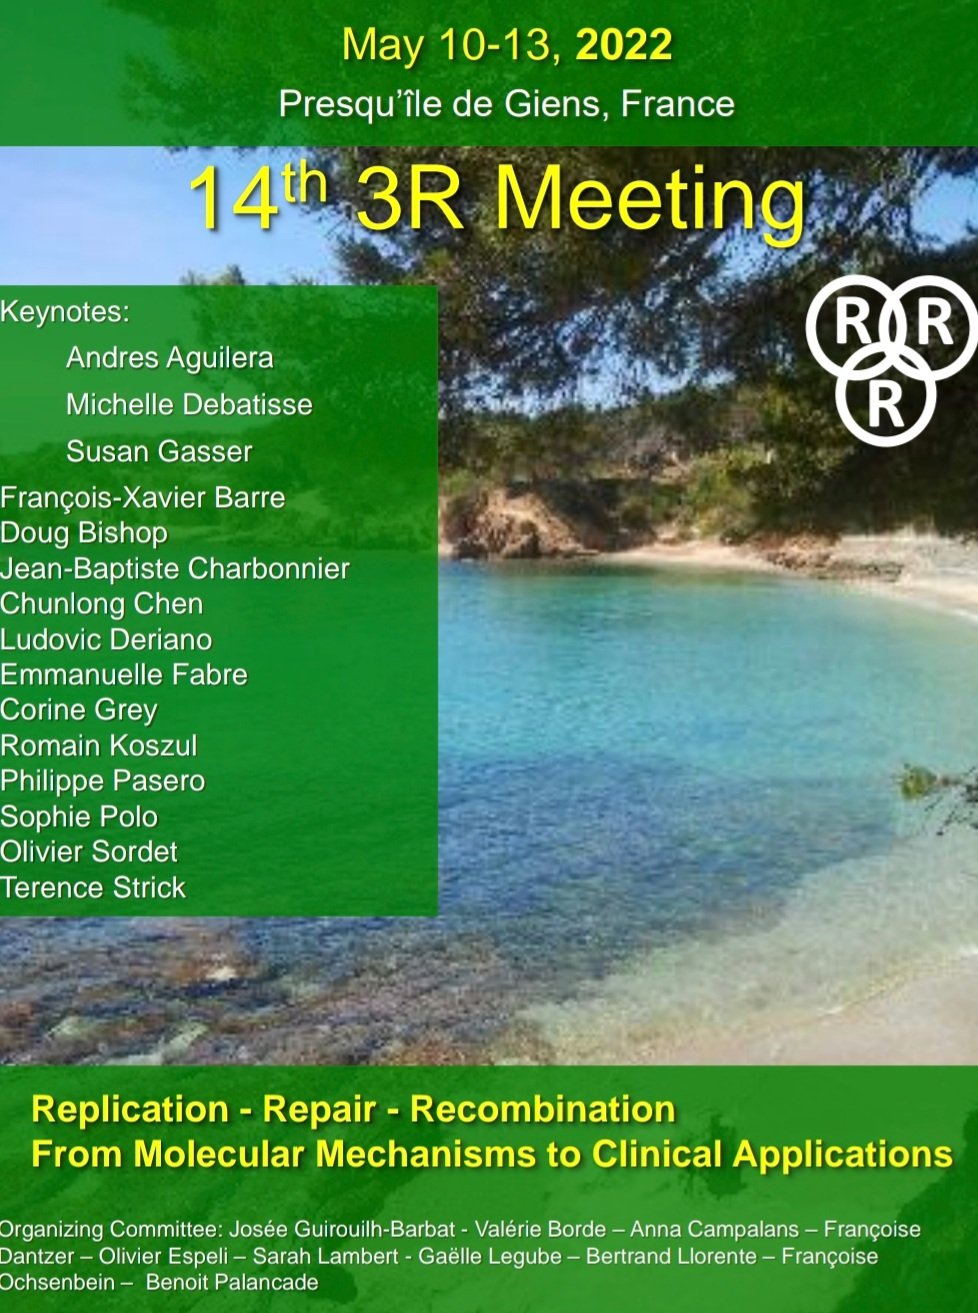 14th French 3R Meeting – May 10-13, 2022